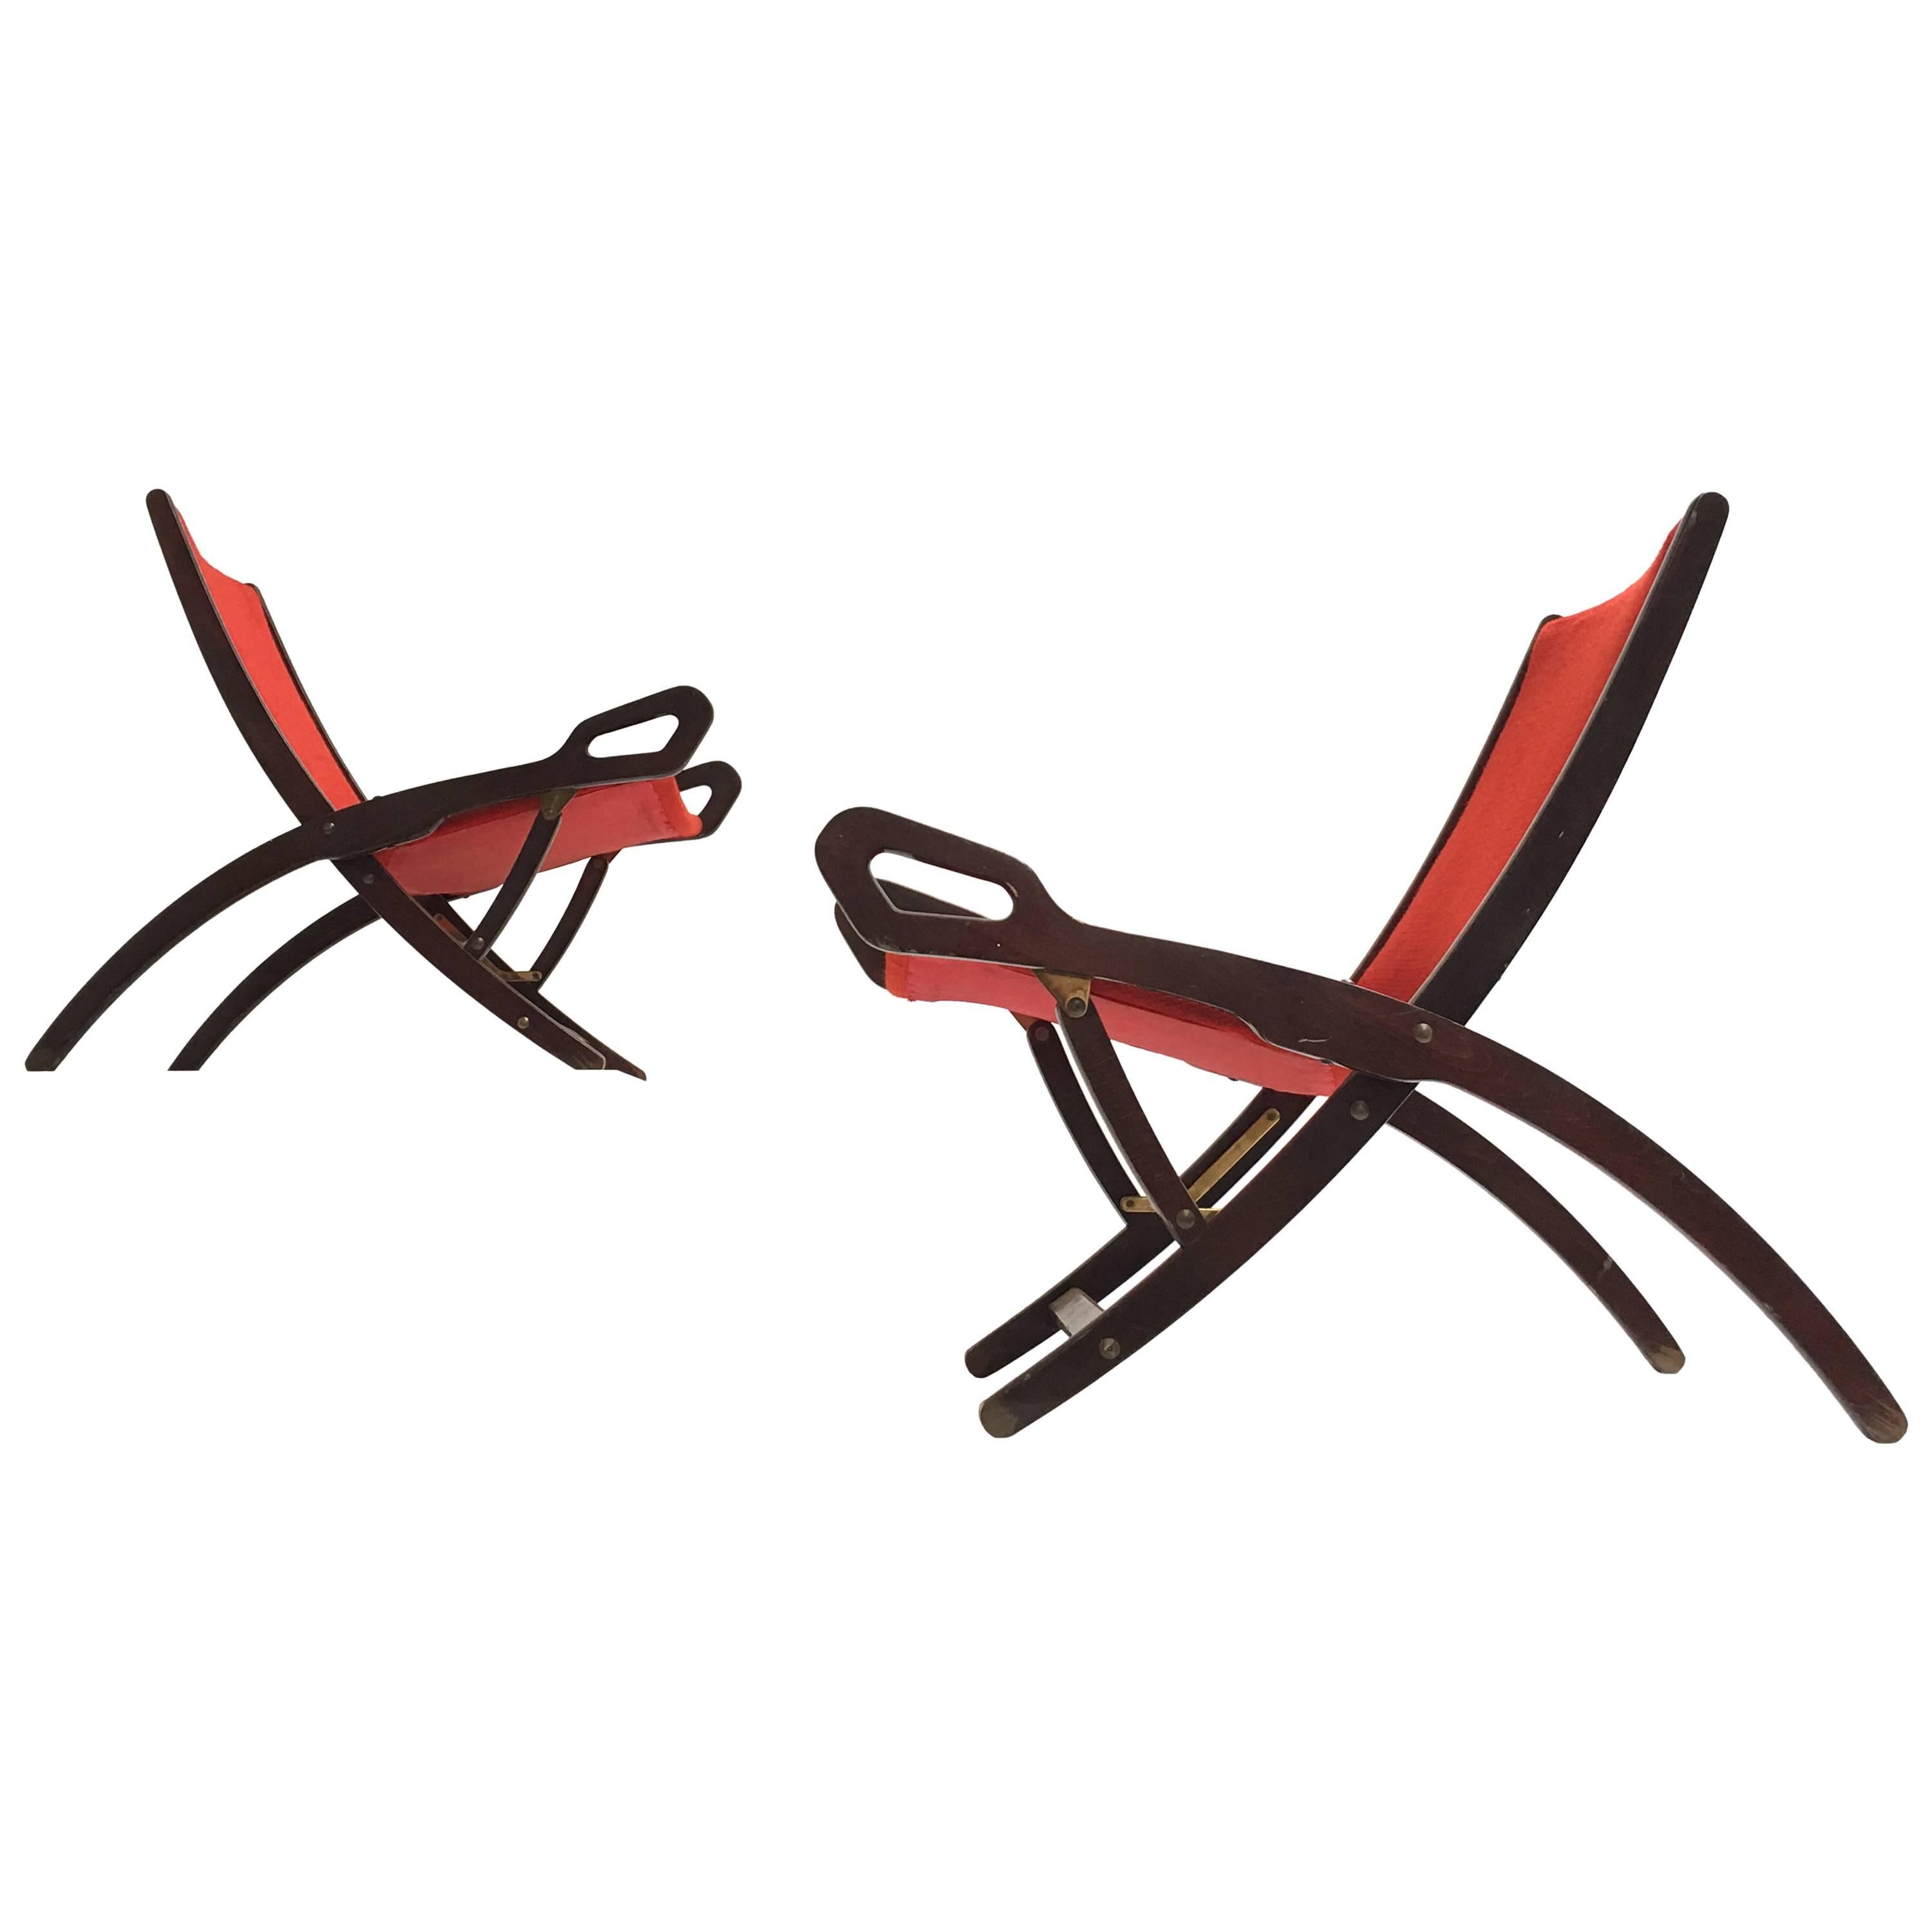 Gio Ponti ''Ninfea'' Chairs, 1958, Published with Certificate from Ponti Archive For Sale